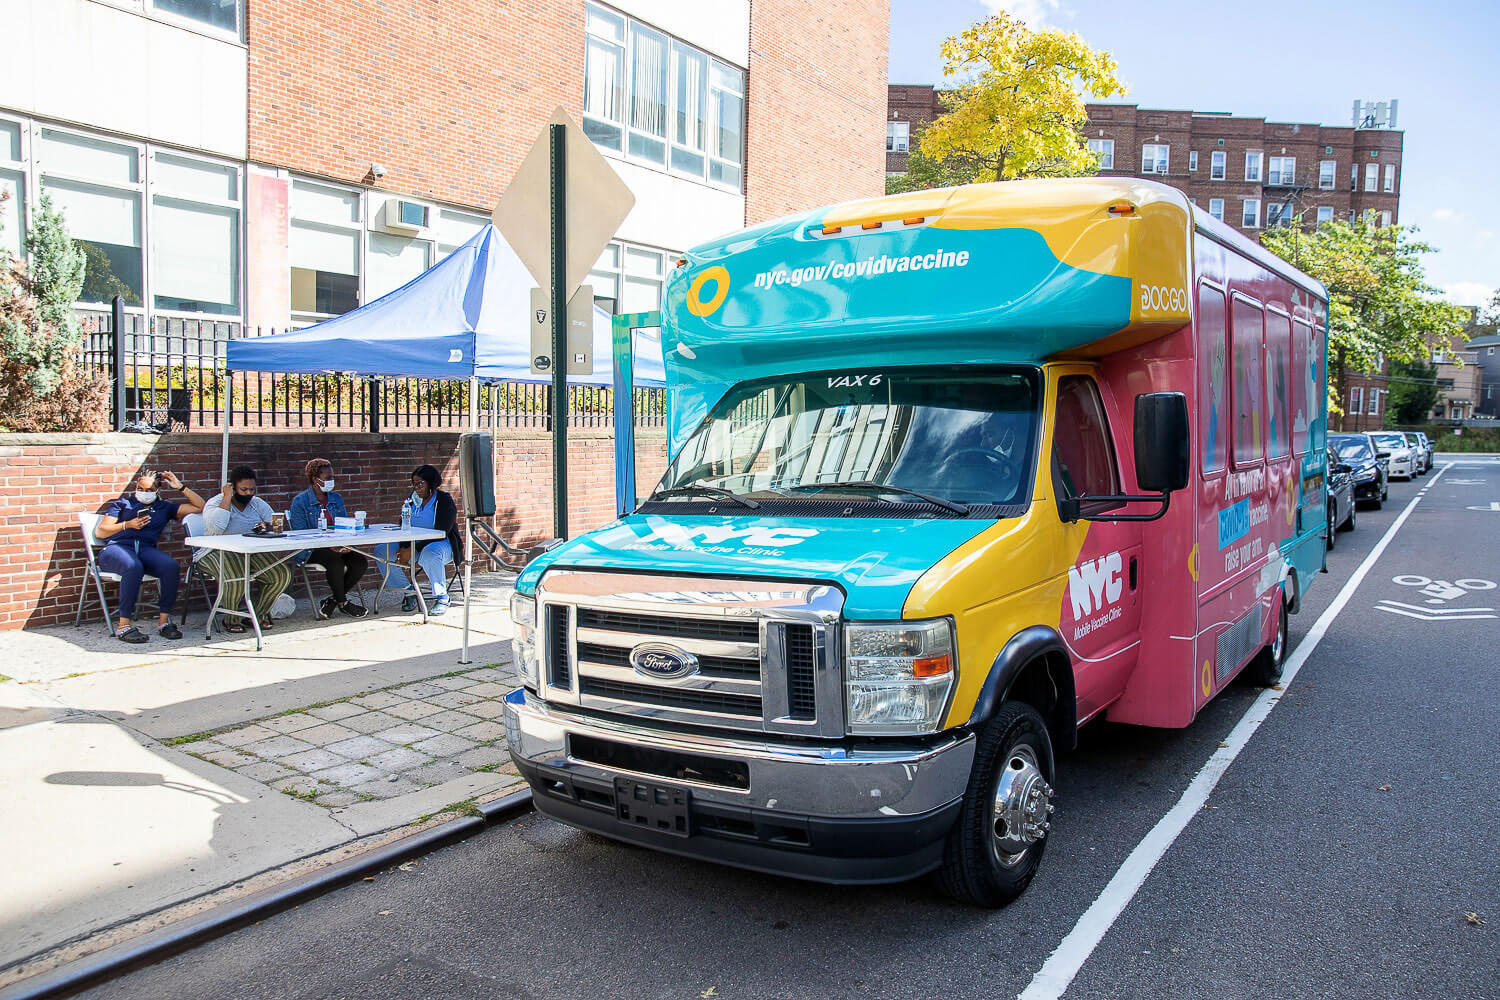 The college hosted the NYC Vaccine Van for a week in September, in which anyone receiving their first dose got a $100 gift card.